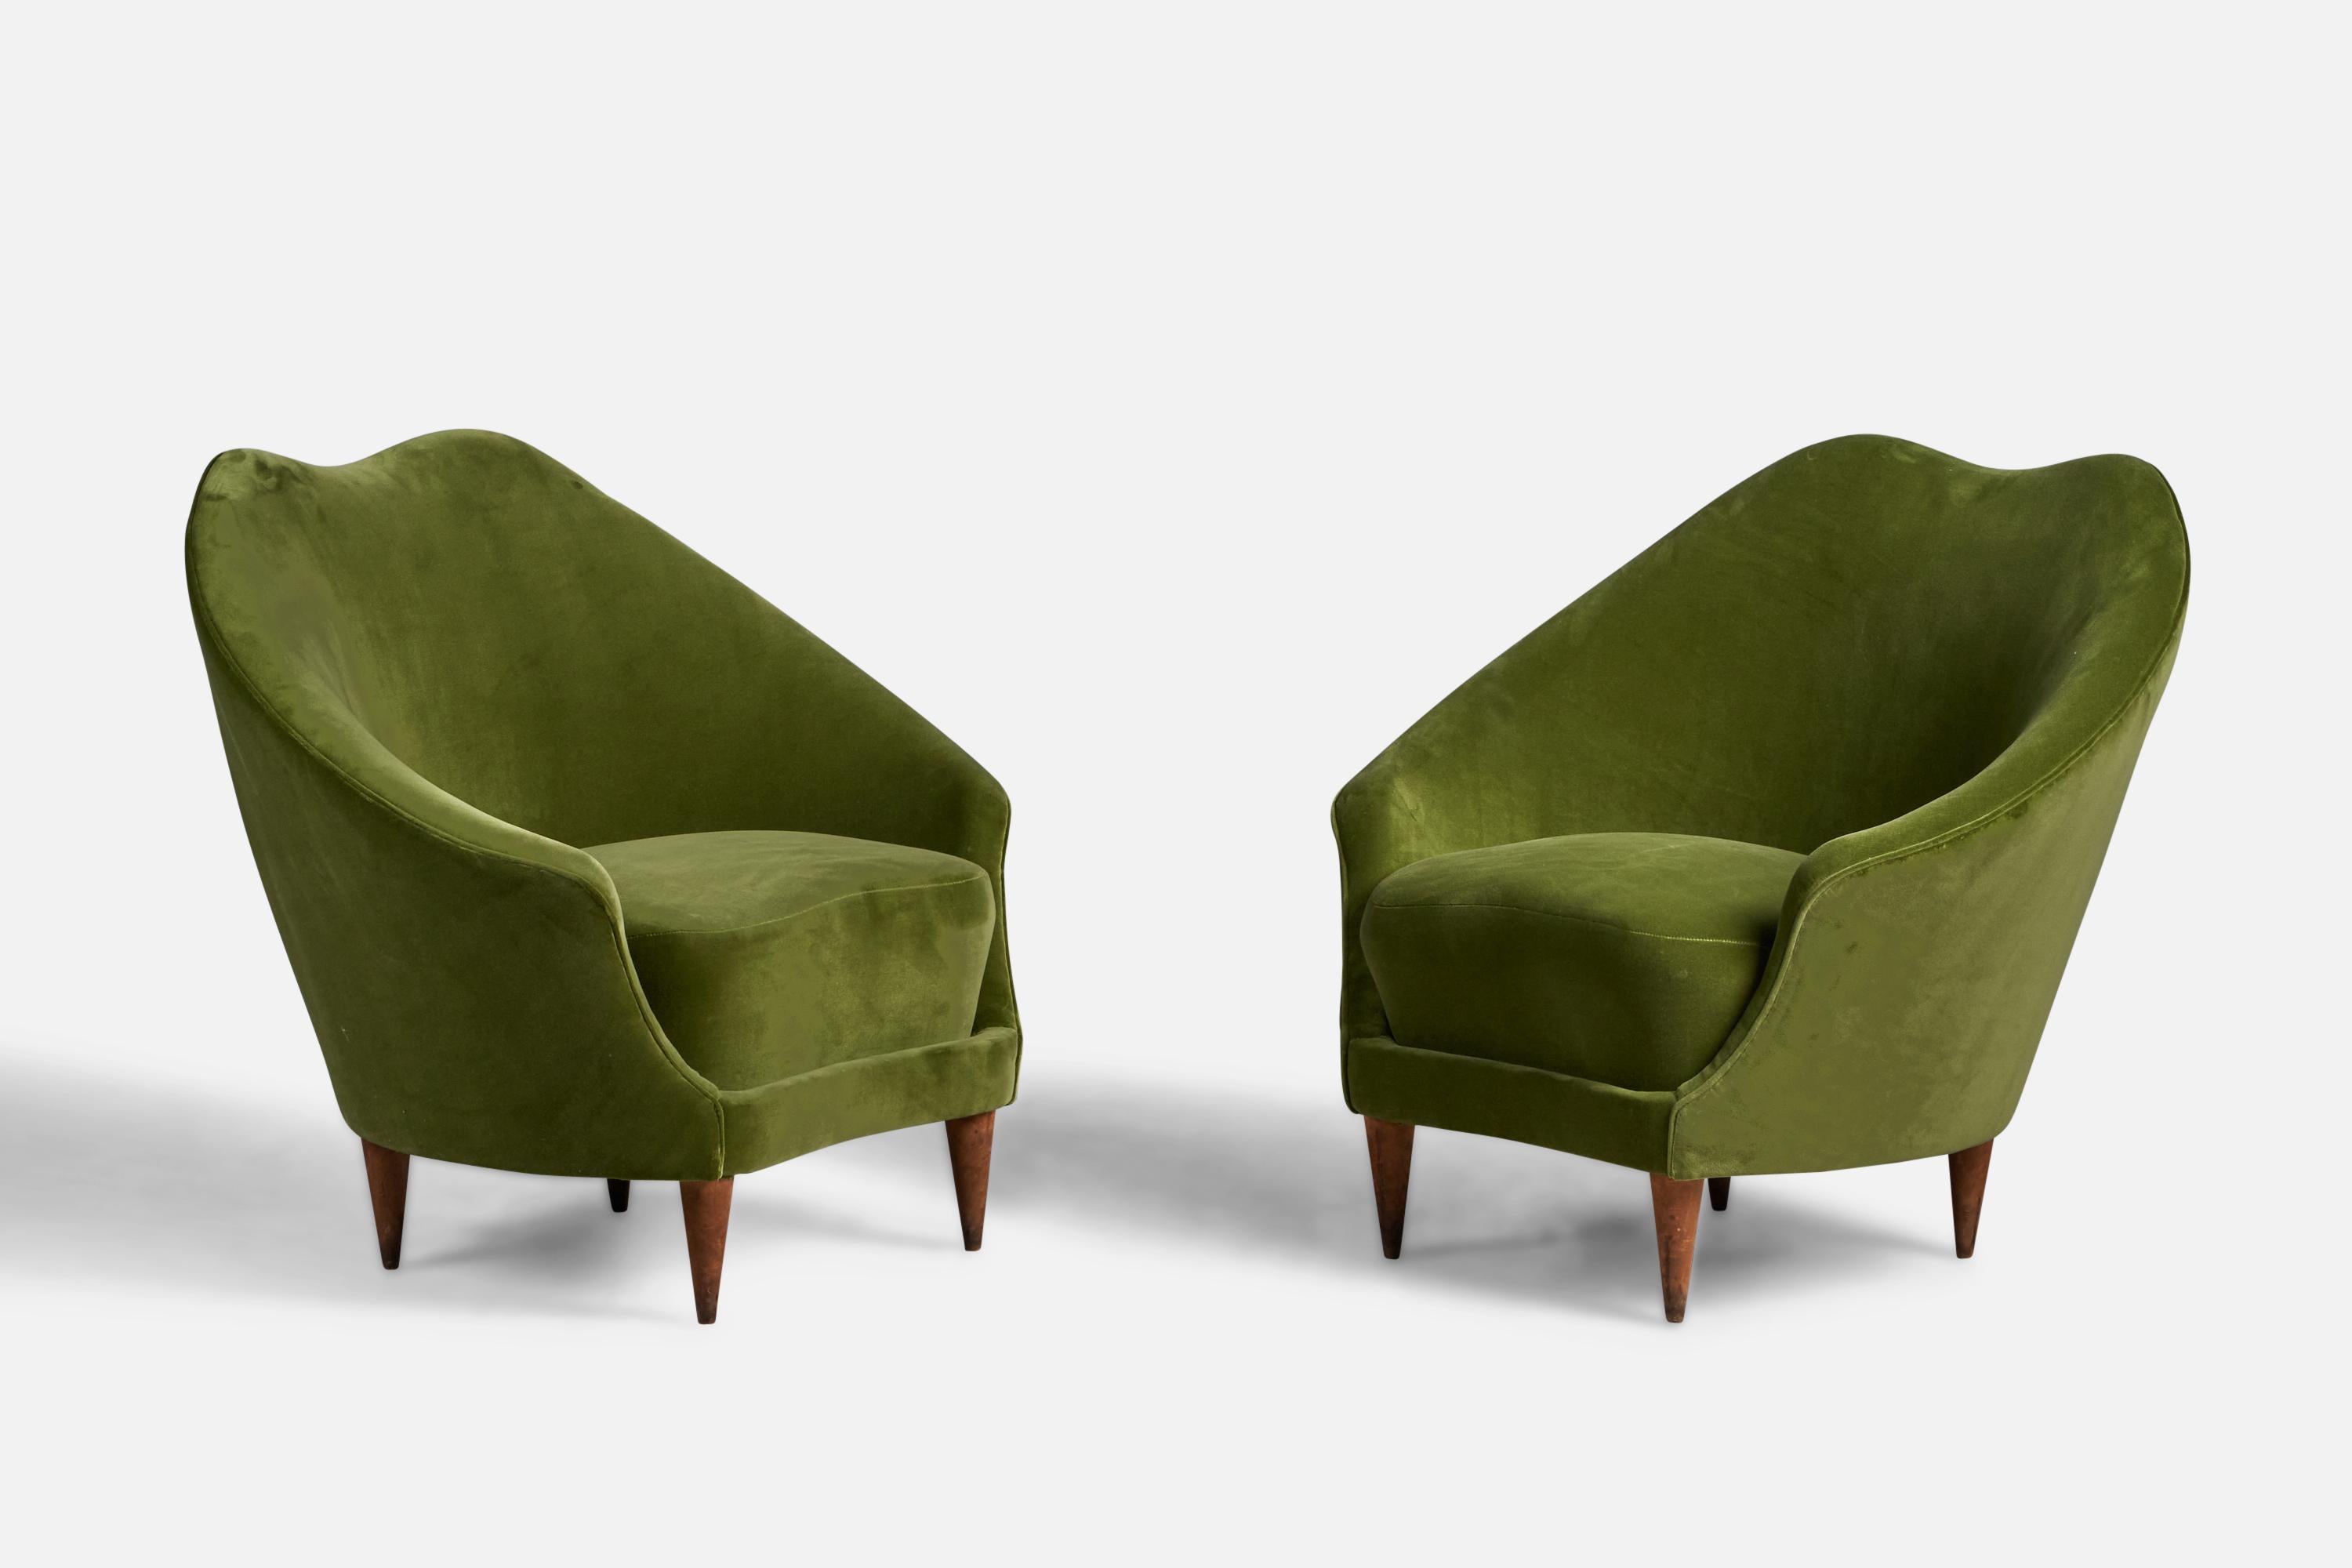 A pair of walnut and green velvet lounge chairs designed by Federico Munari and produced by ISA Bergamo, Italy, 1950s.

16” seat height

